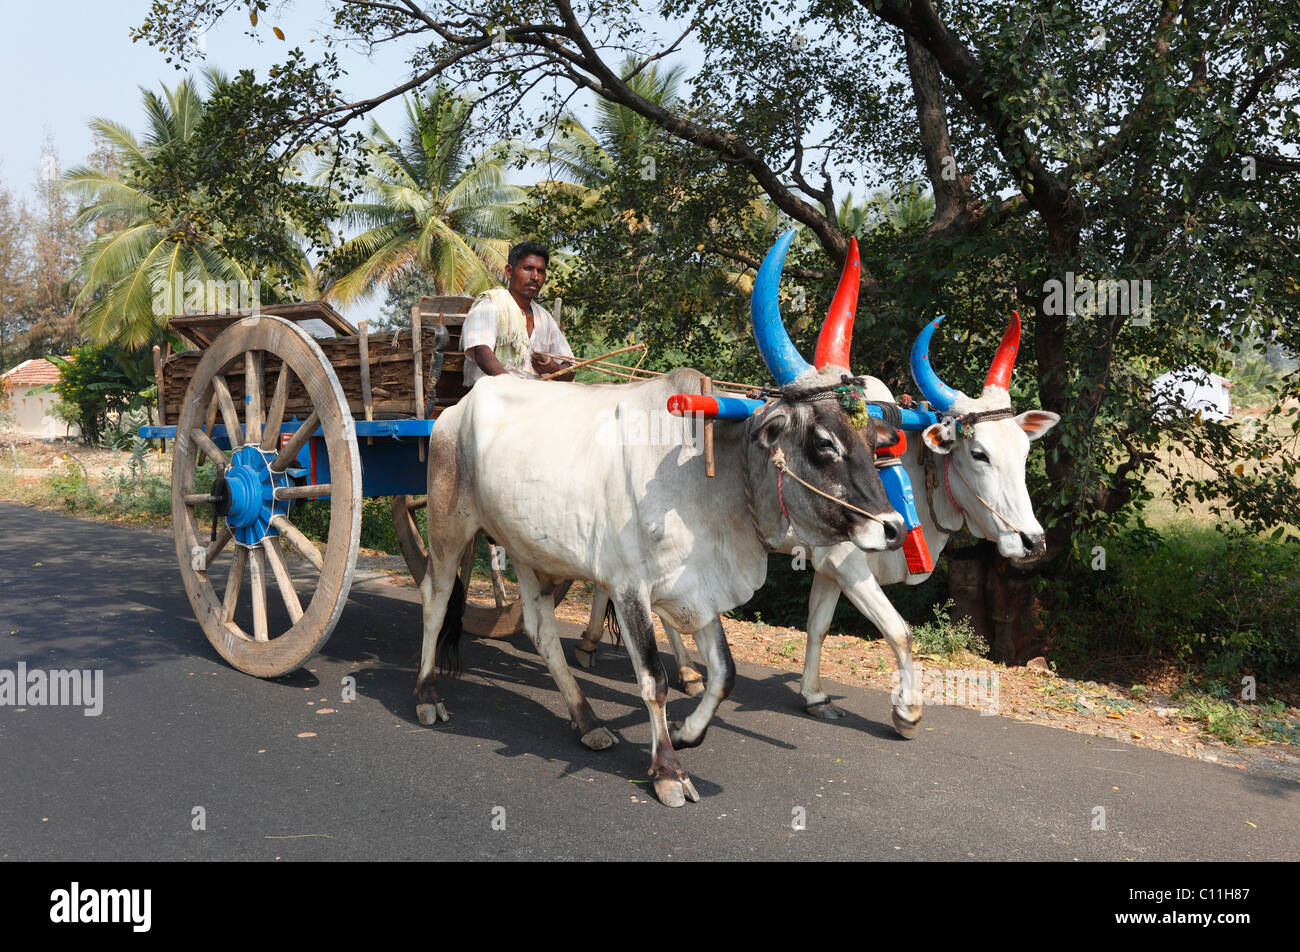 Ox cart, oxen with colourful horns, Tamil Nadu, Tamilnadu, South India, India, South Asia, Asia Stock Photo